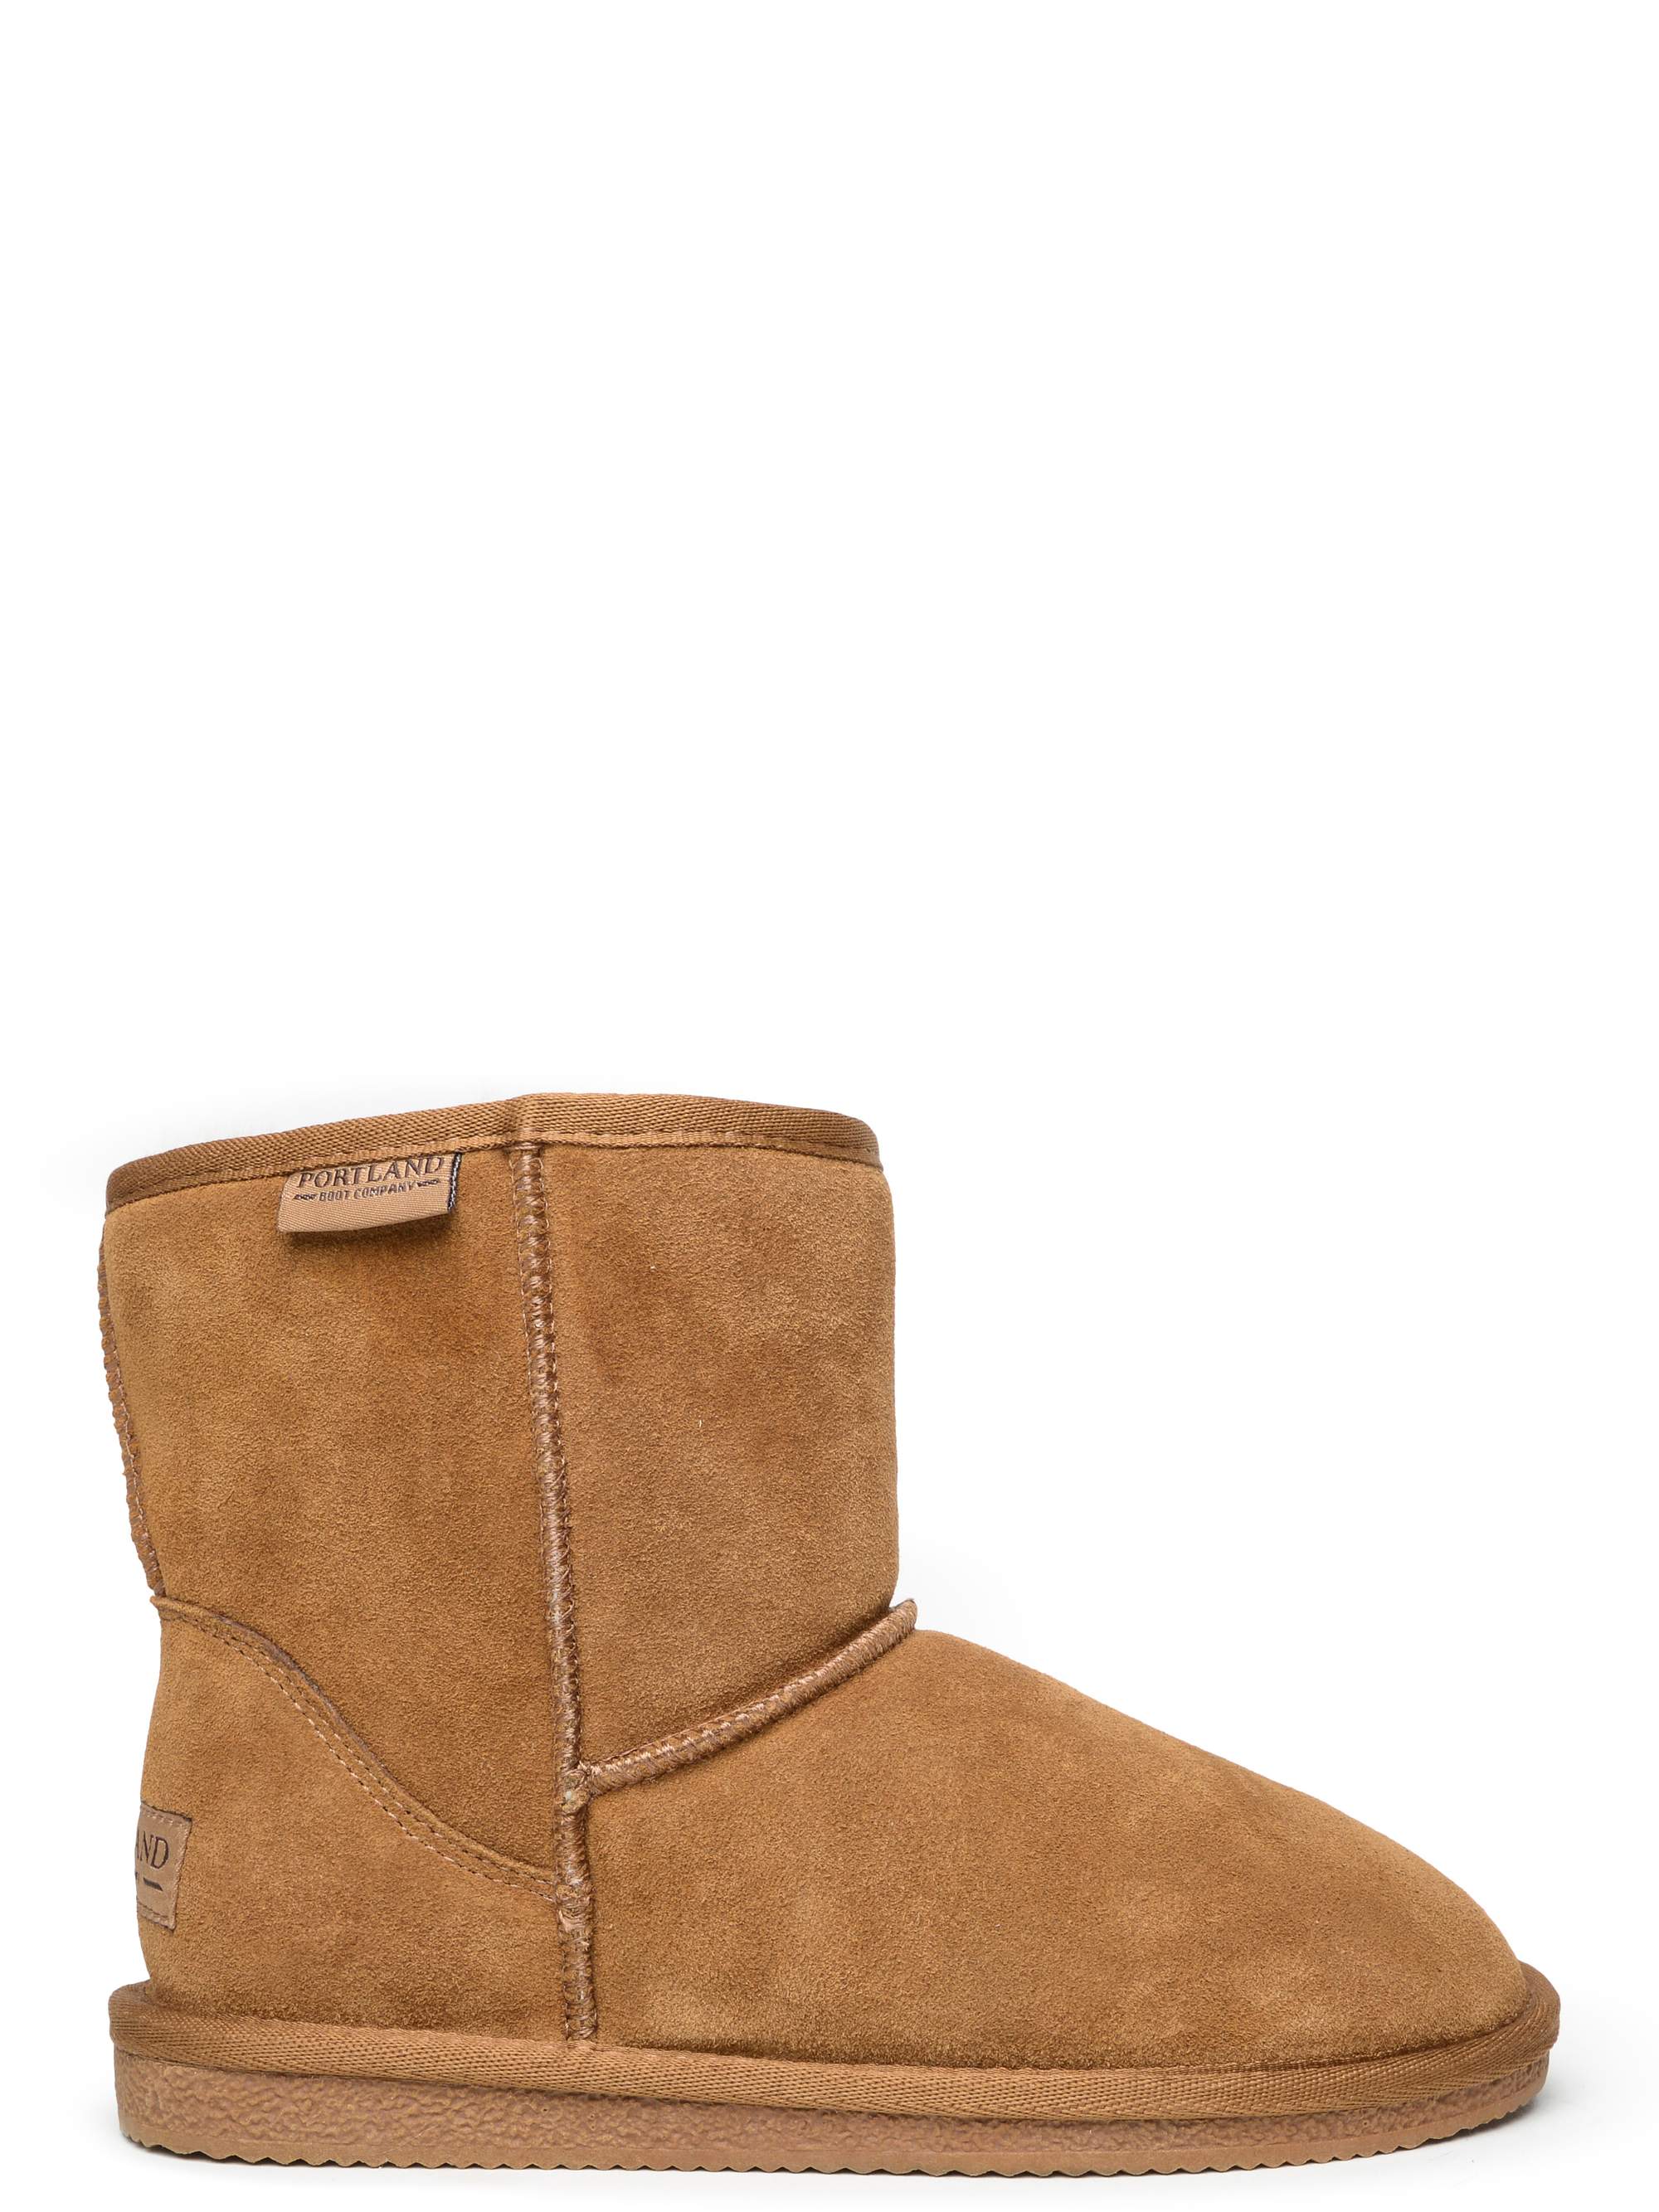 Portland Boot Company Women's Short Cozy Suede Boot - image 1 of 5